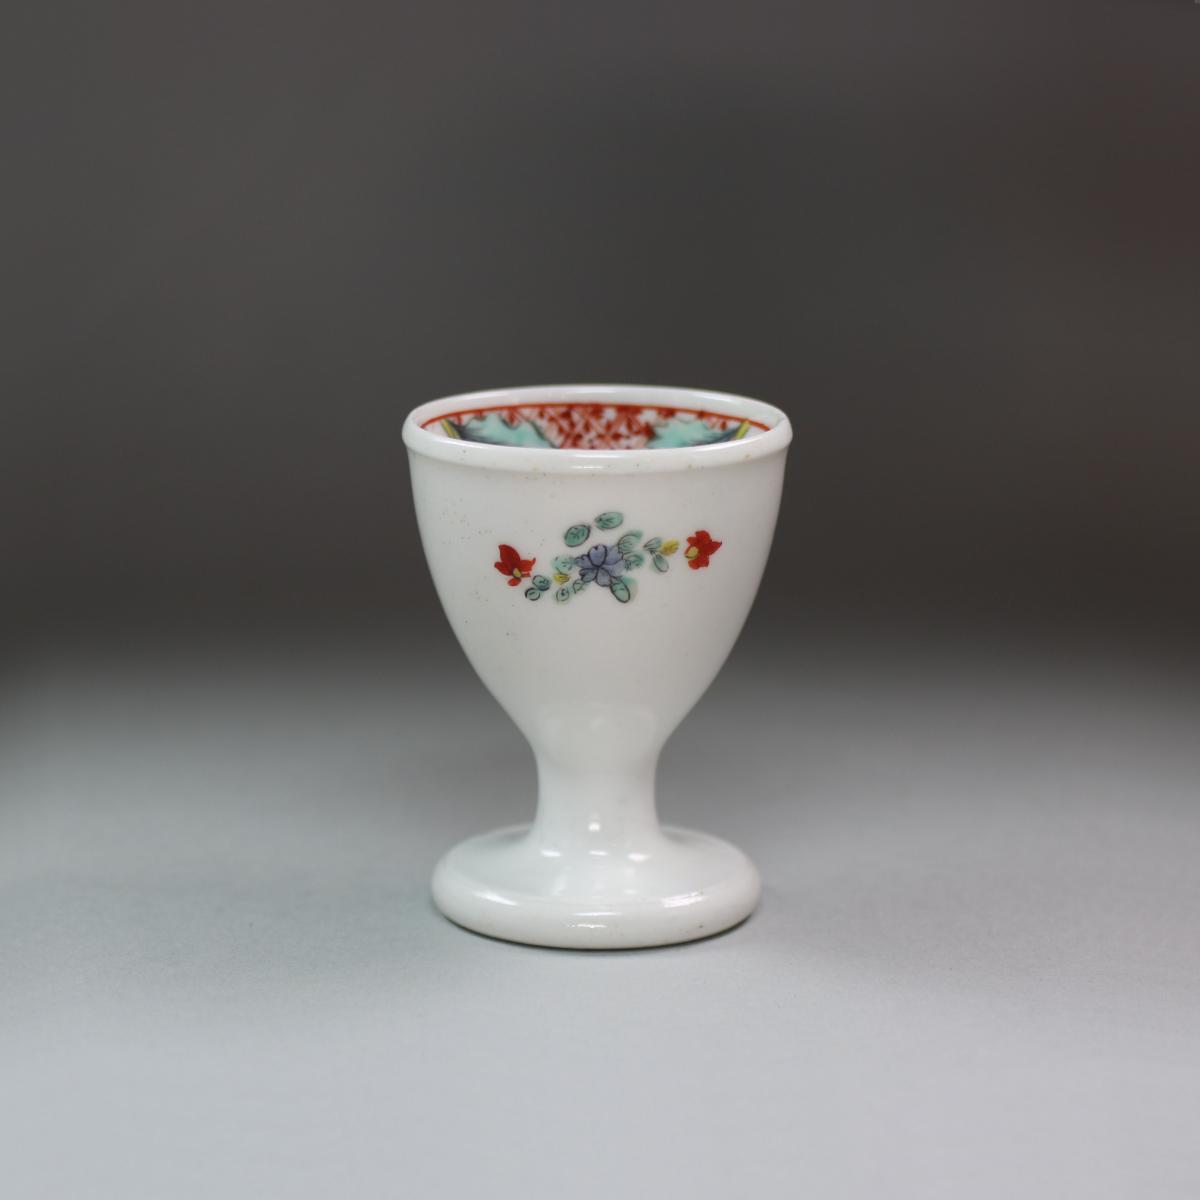 Chantilly egg-cup in the kakiemon palate, circa 1760